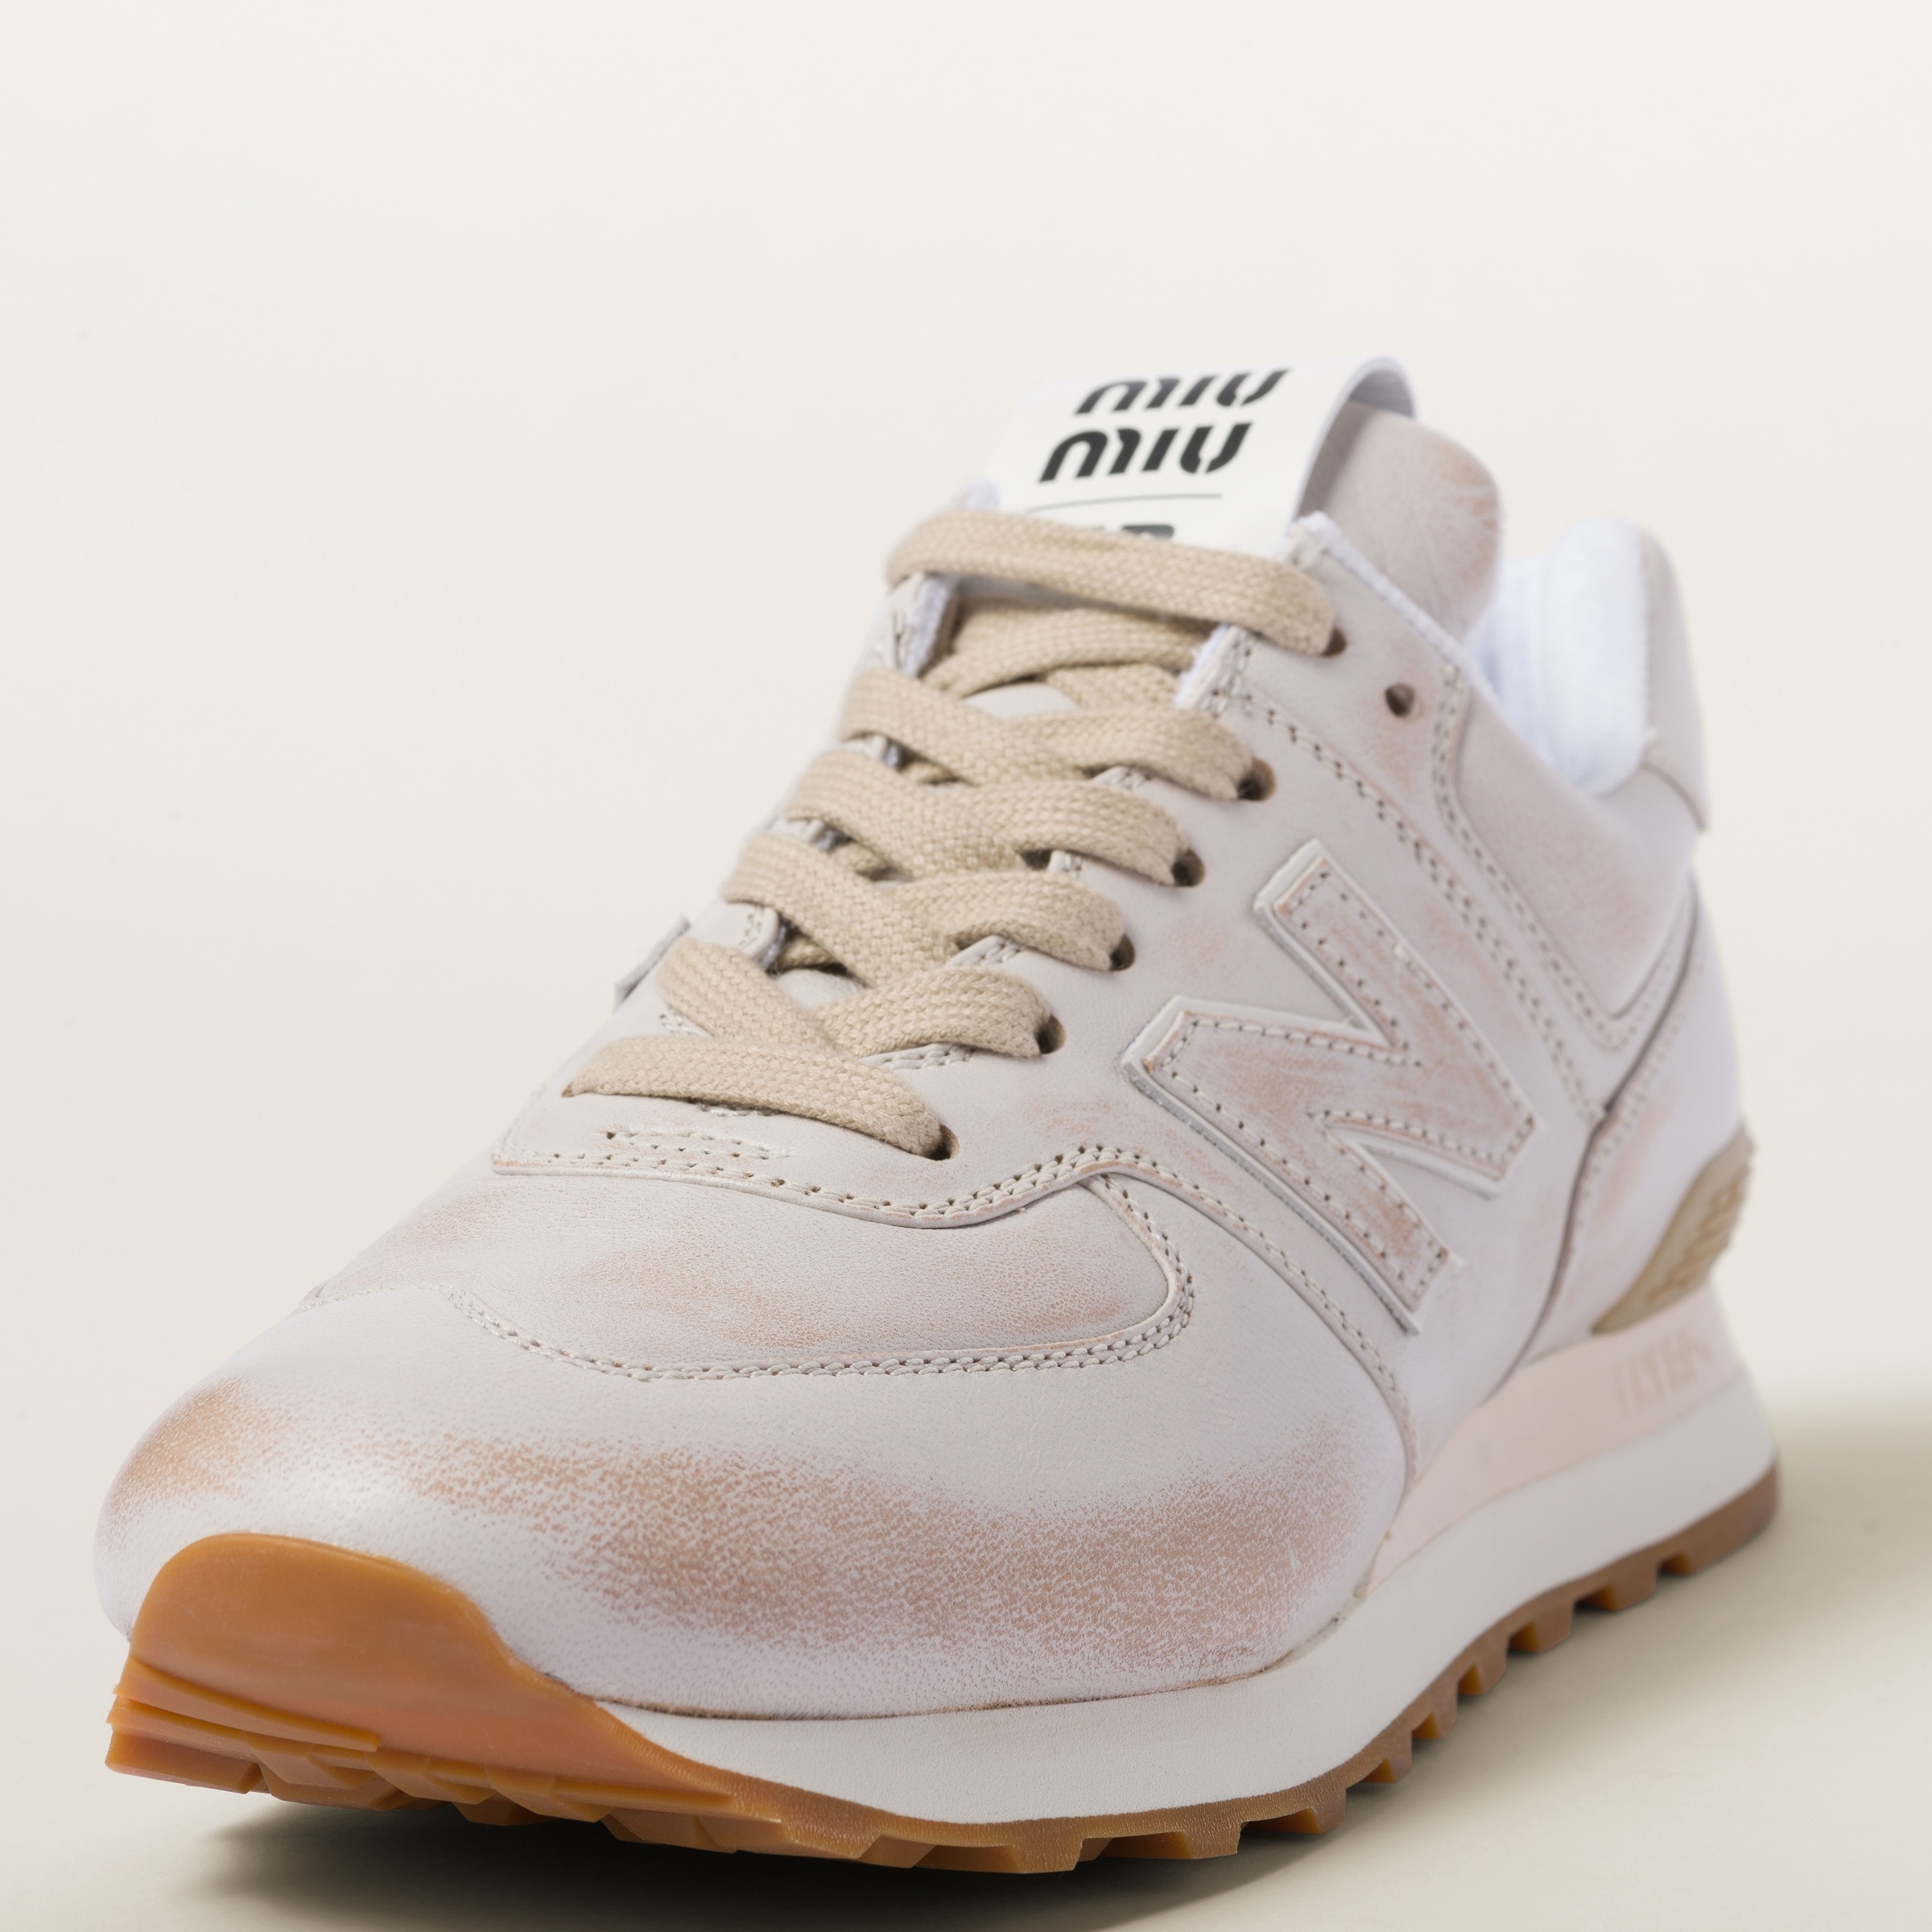 Miu Miu & New Balance's 574 sneaker collaboration with soft velvet & distressed leather uppers